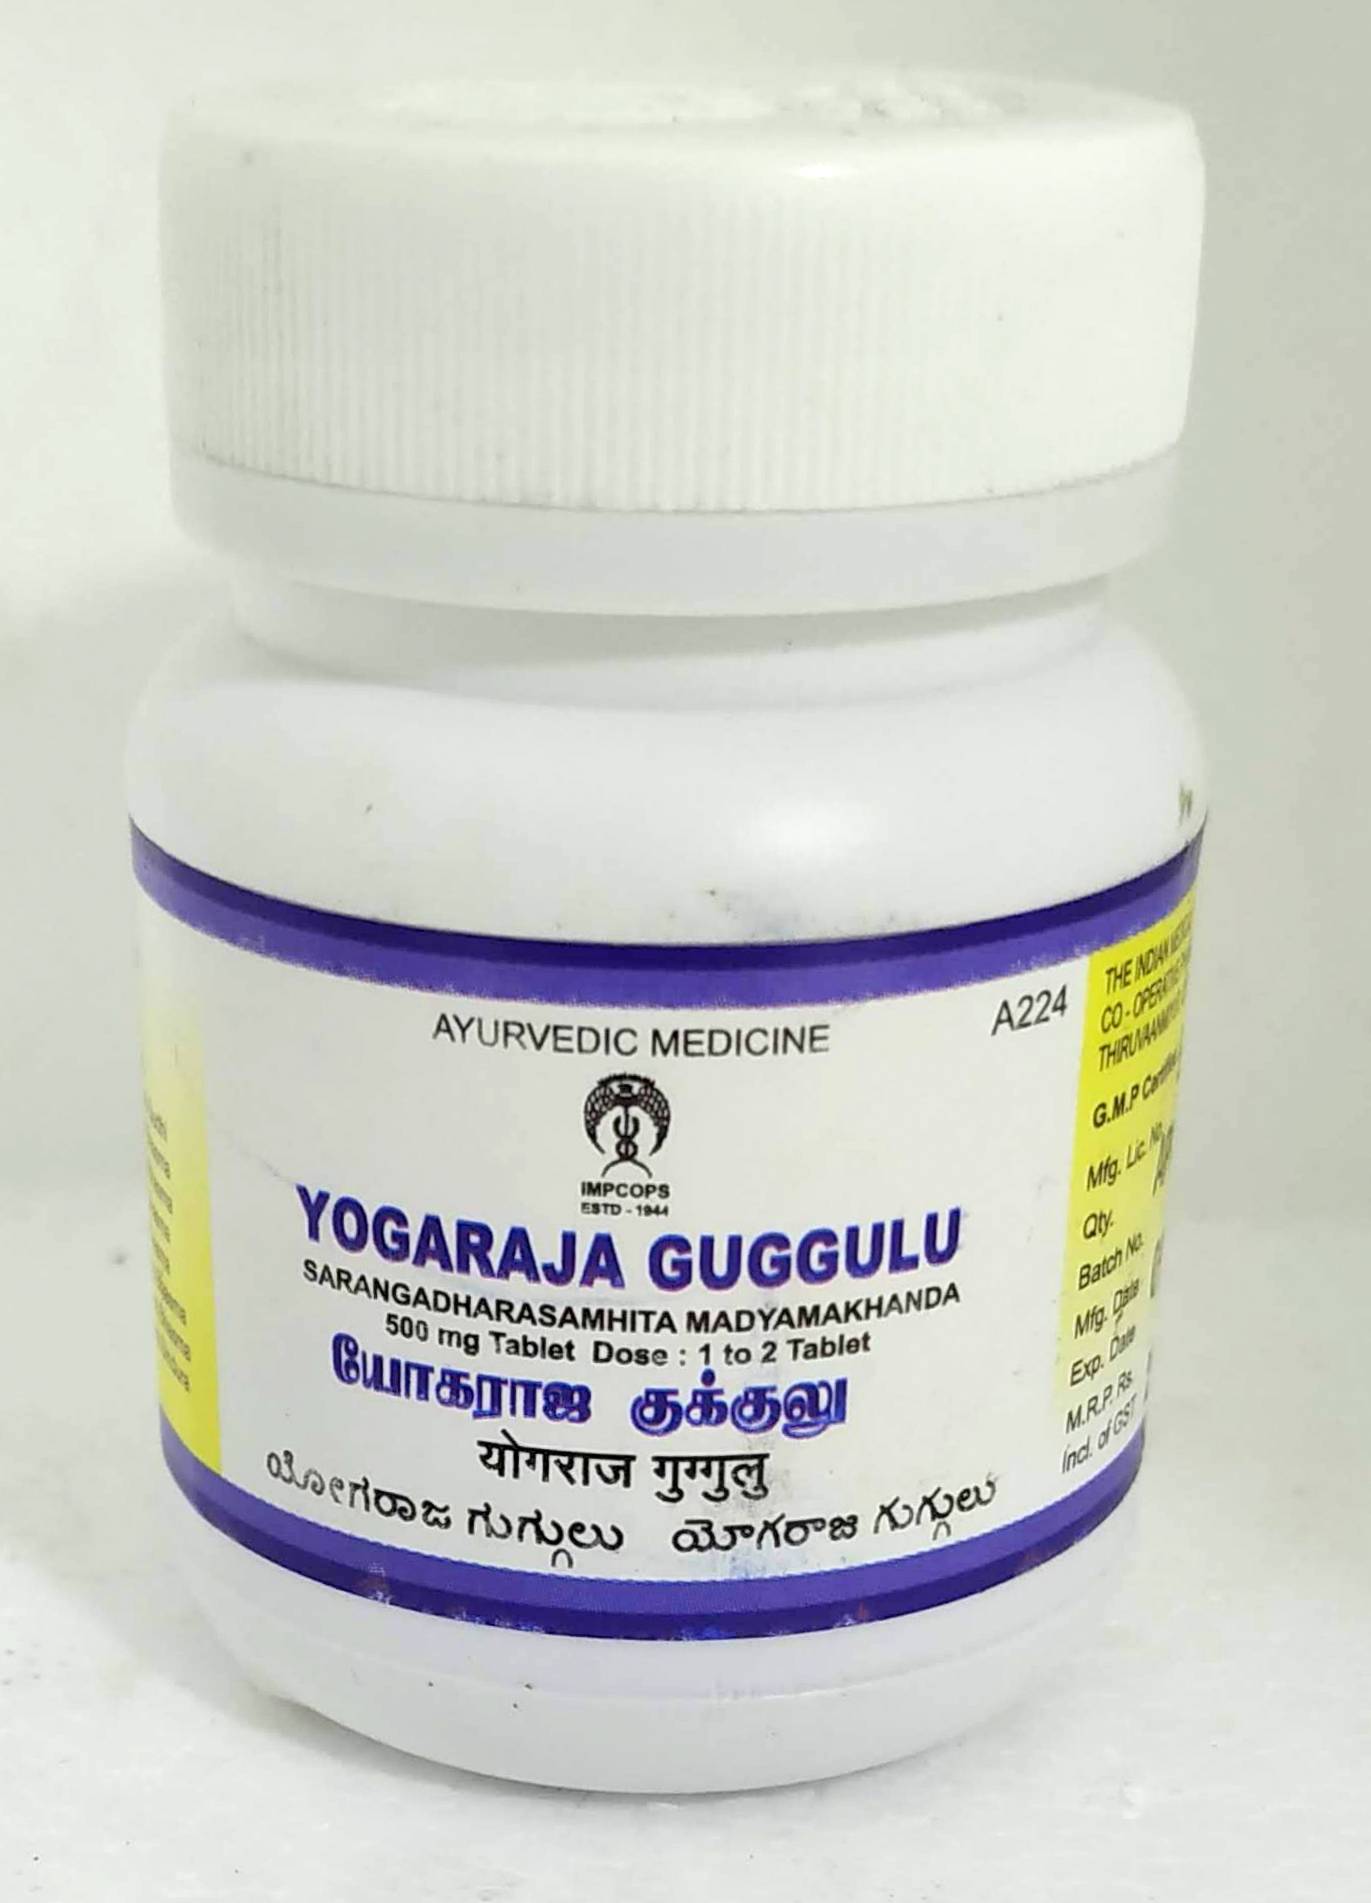 Shop Impcops Yogaraja Guggulu 50Tablets at price 369.00 from Impcops Online - Ayush Care